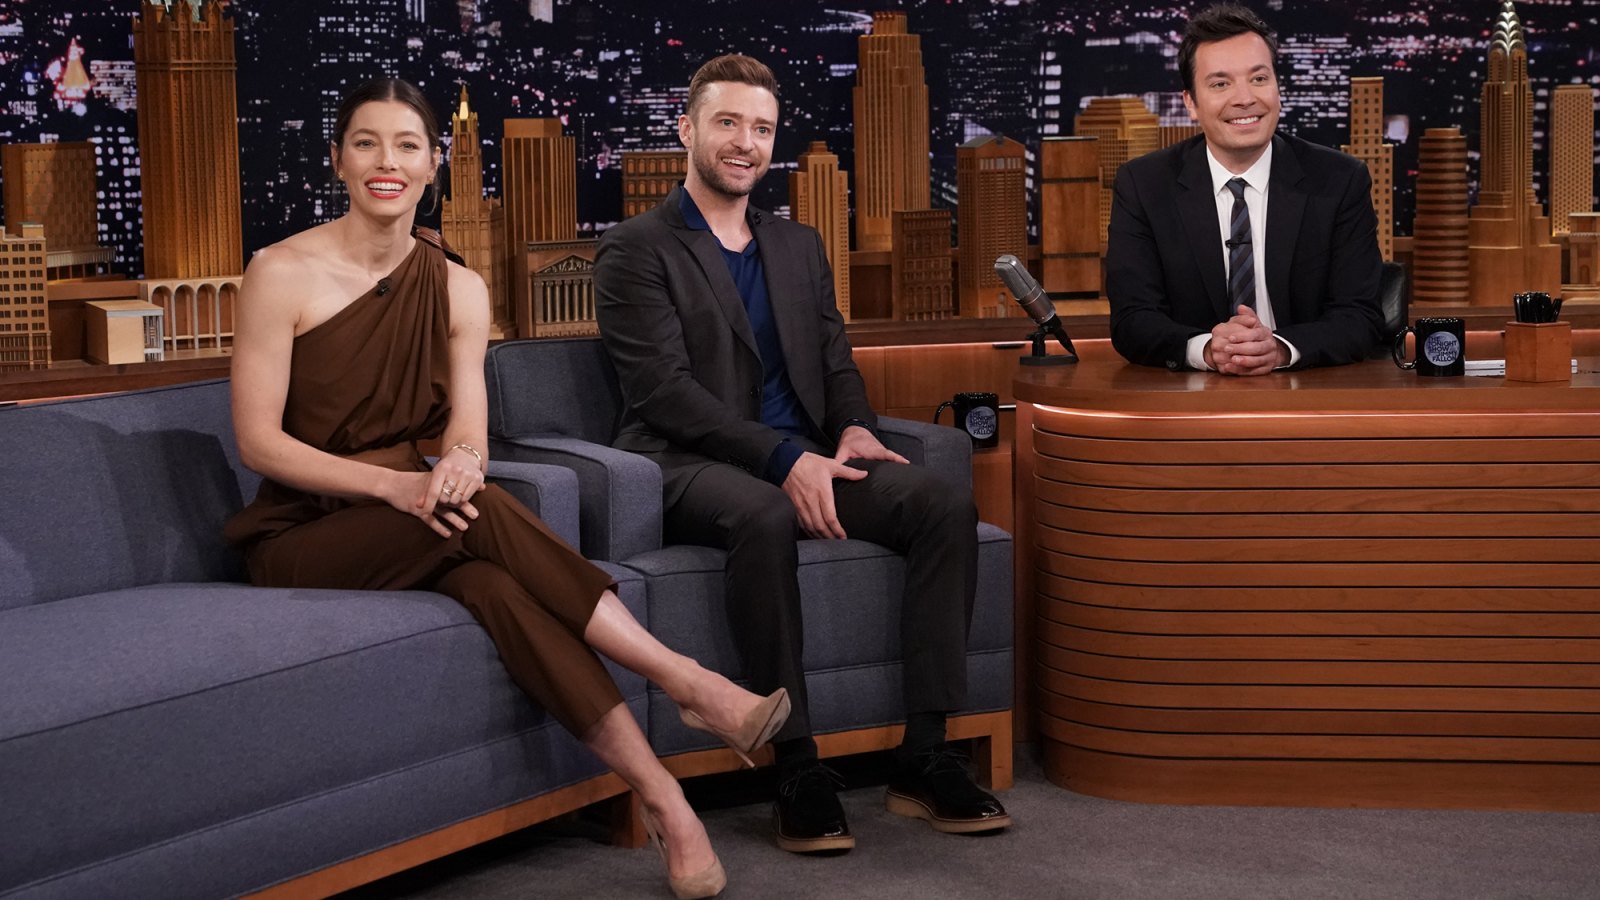 Jessica Biel and Justin Timberlake during an interview with host Jimmy Fallon.